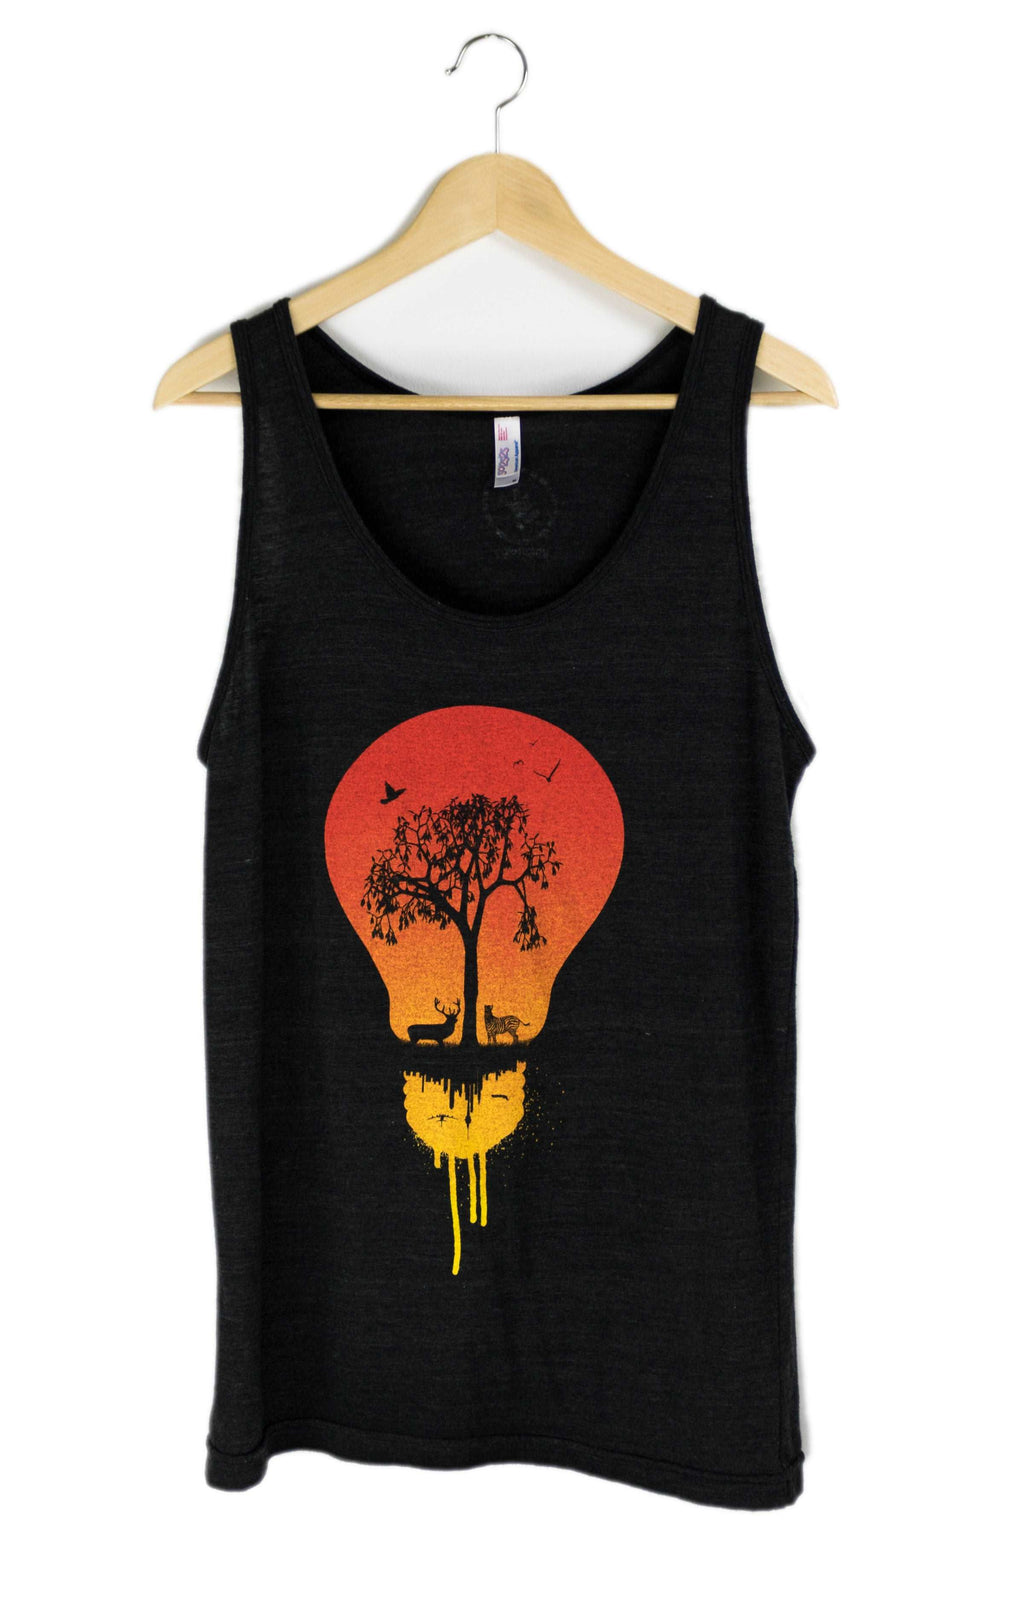 The two worlds Tank Top